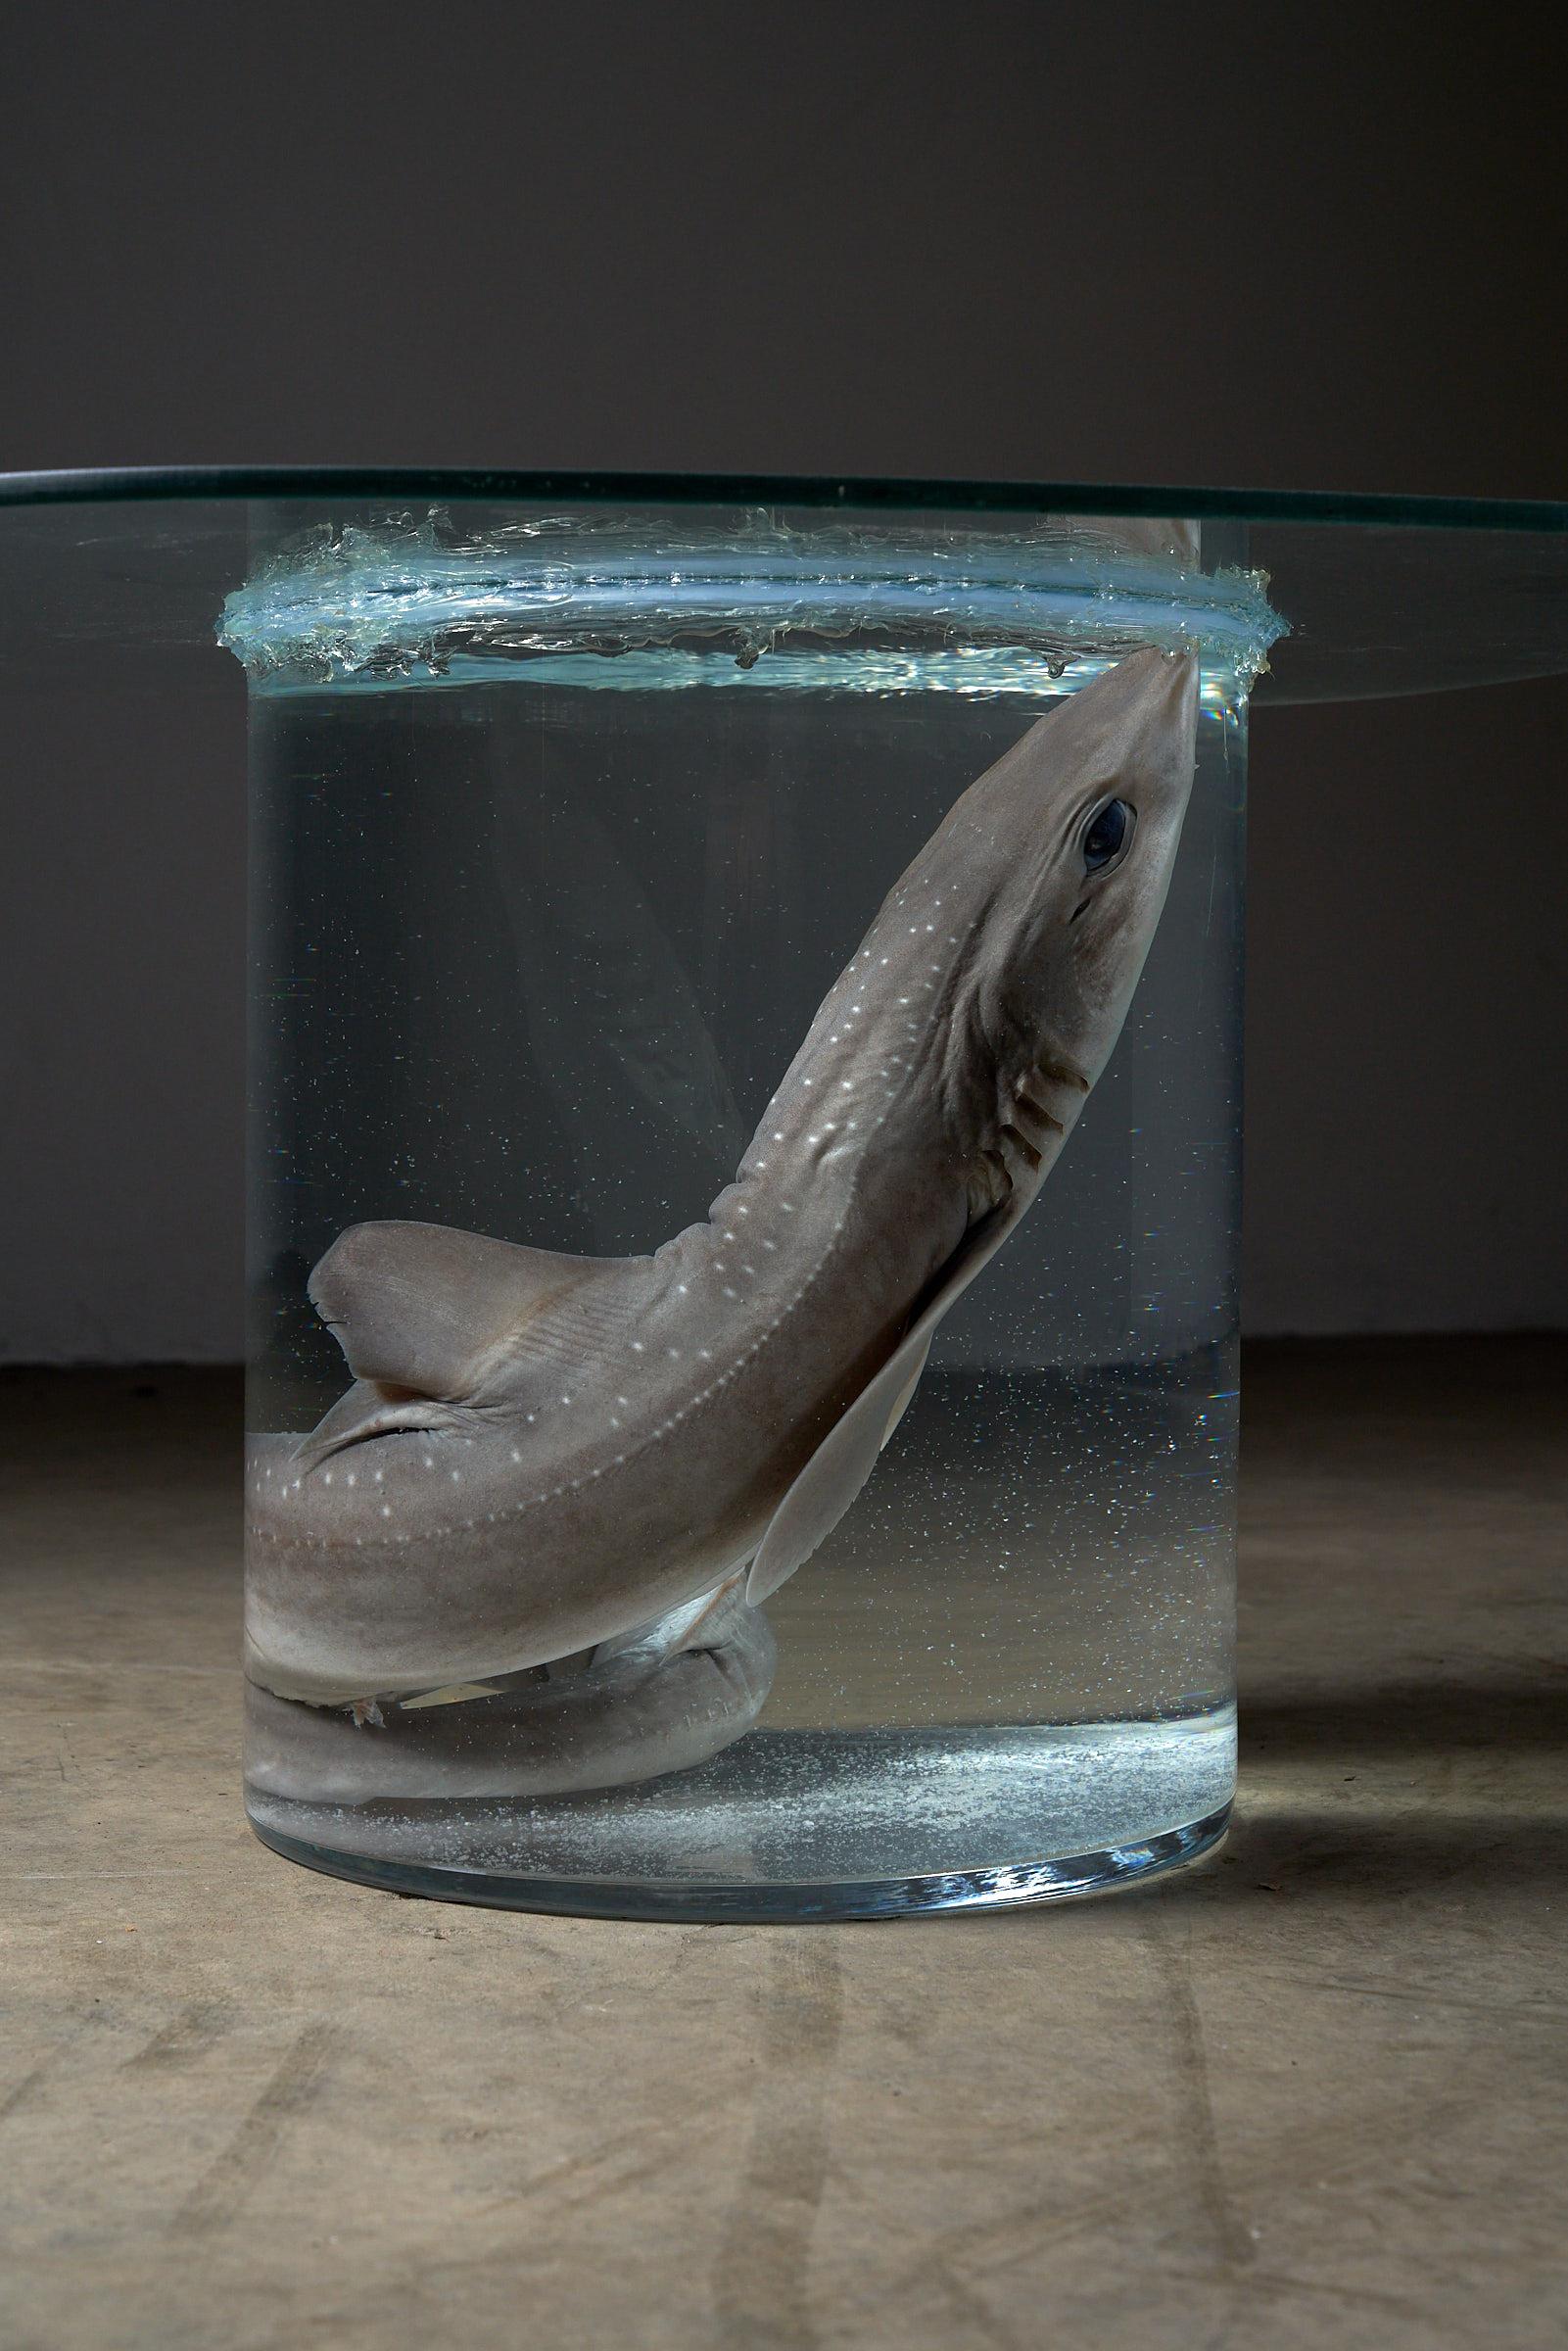 Introducing our extraordinary Shark-in-Formaldehyde Sidetable—a true masterpiece of art and function. Nestled within a transparent, round glass enclosure, a preserved shark rests serenely in formaldehyde. Crowned with a glass table top, not only